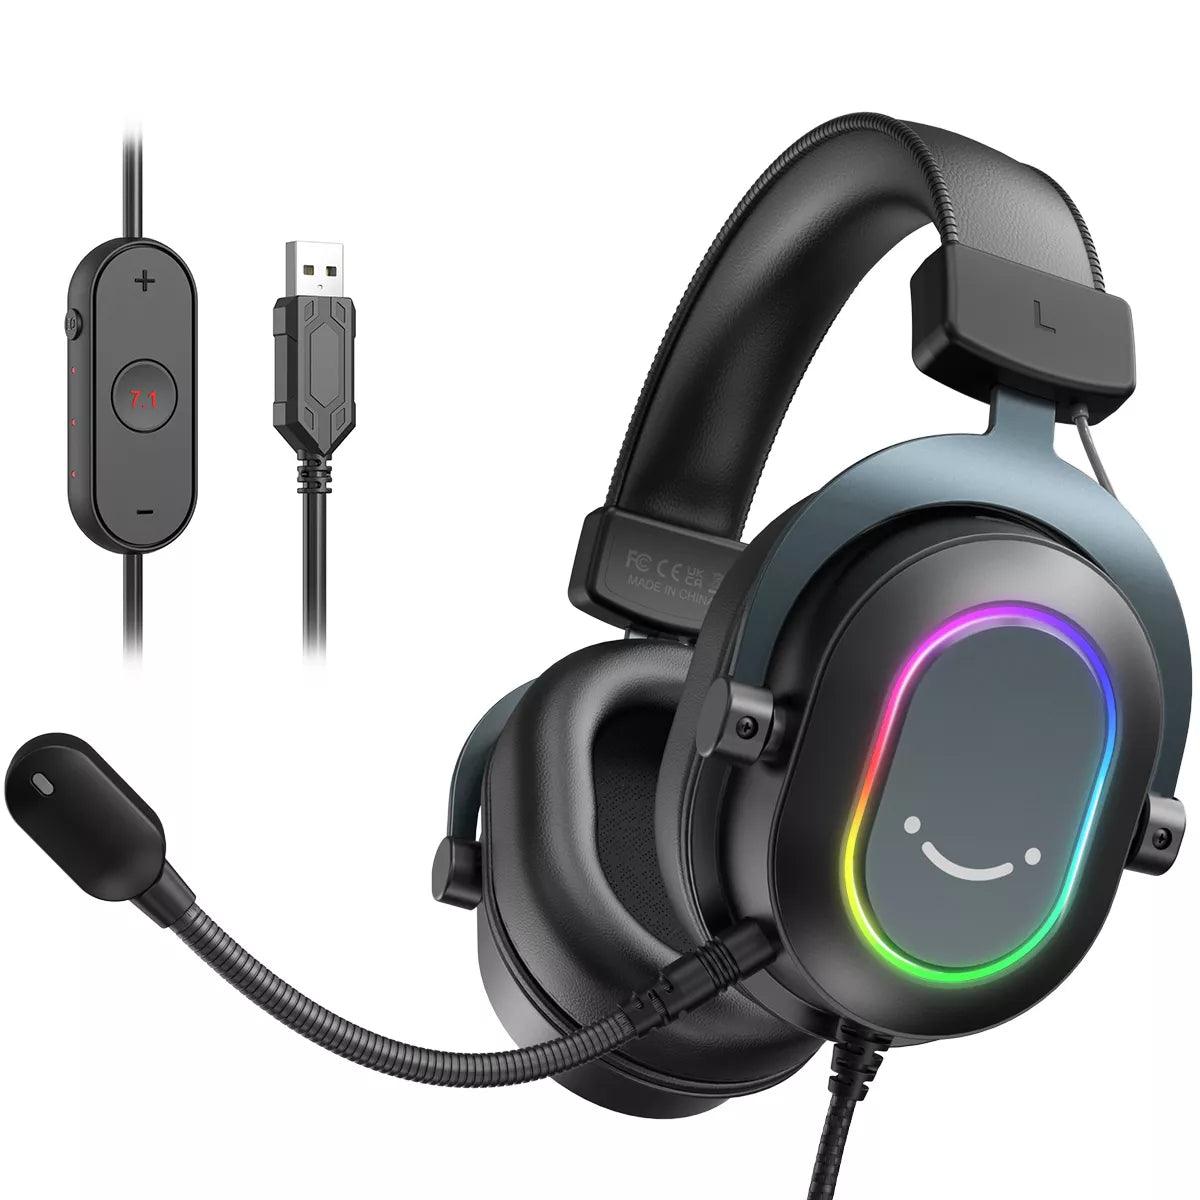 Fifine RGB Gaming Headset with 7.1 Surround Sound and Mic - Enhanced Gaming Experience  ourlum.com black CHINA 